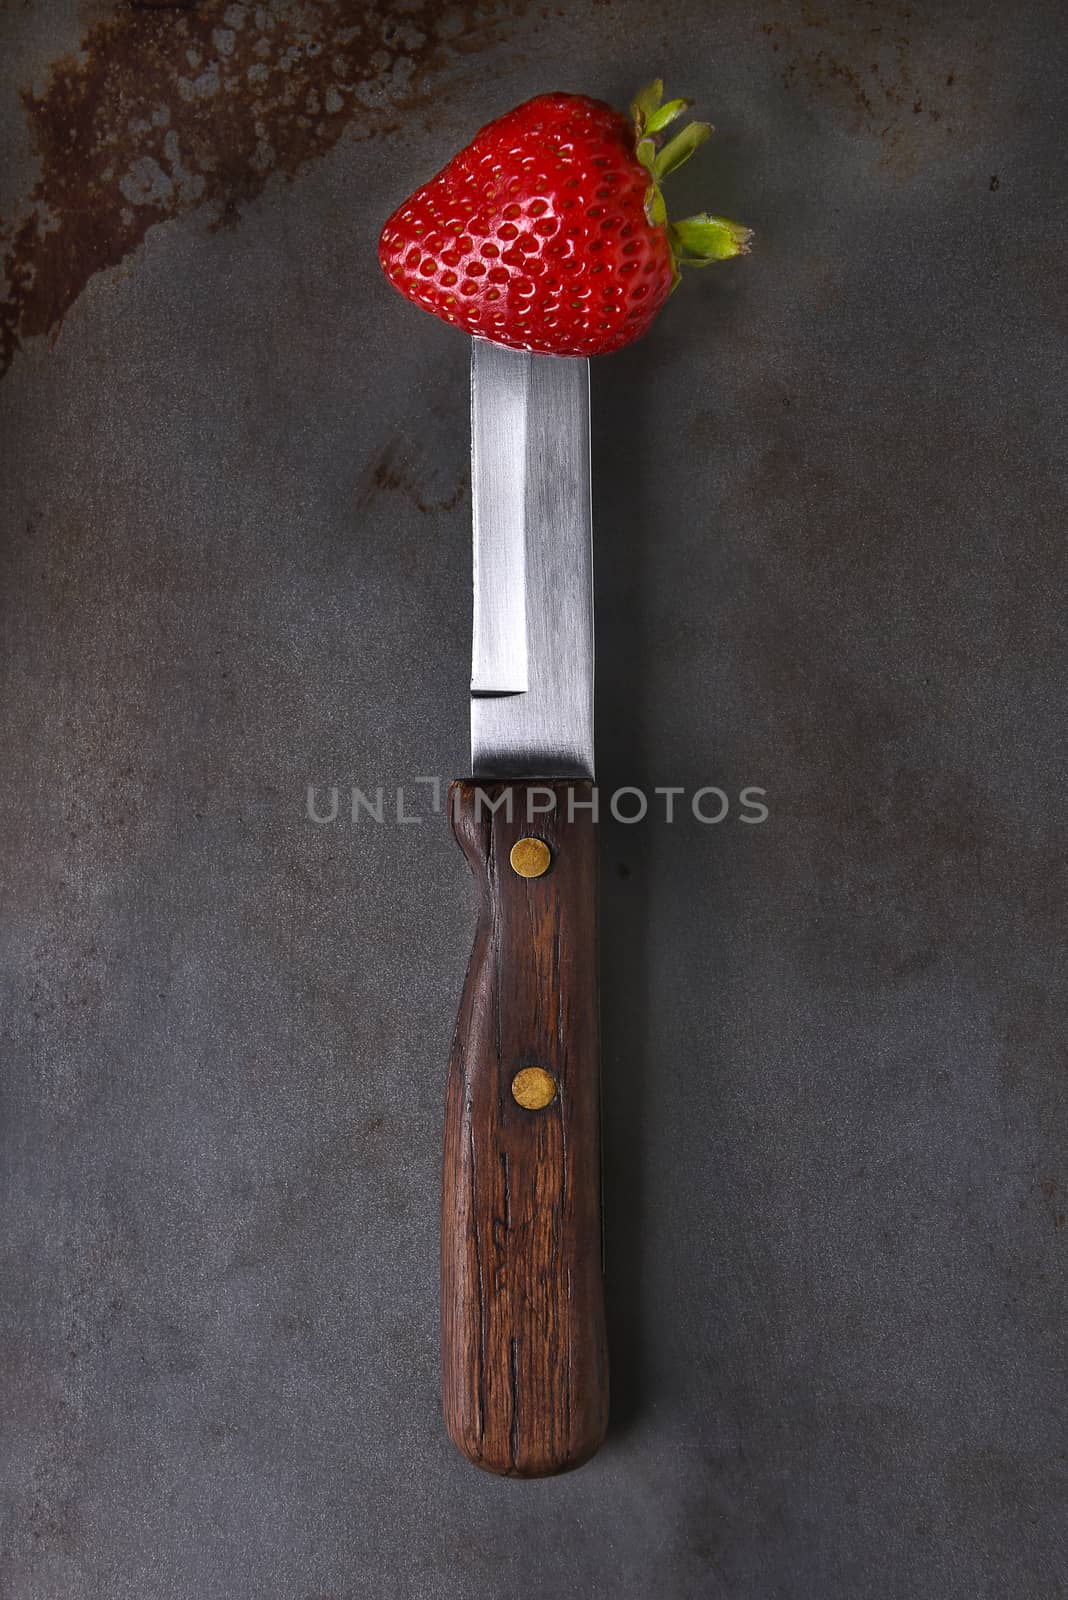 Still life of a fresh picked strawberry stuck on the end of a knife.